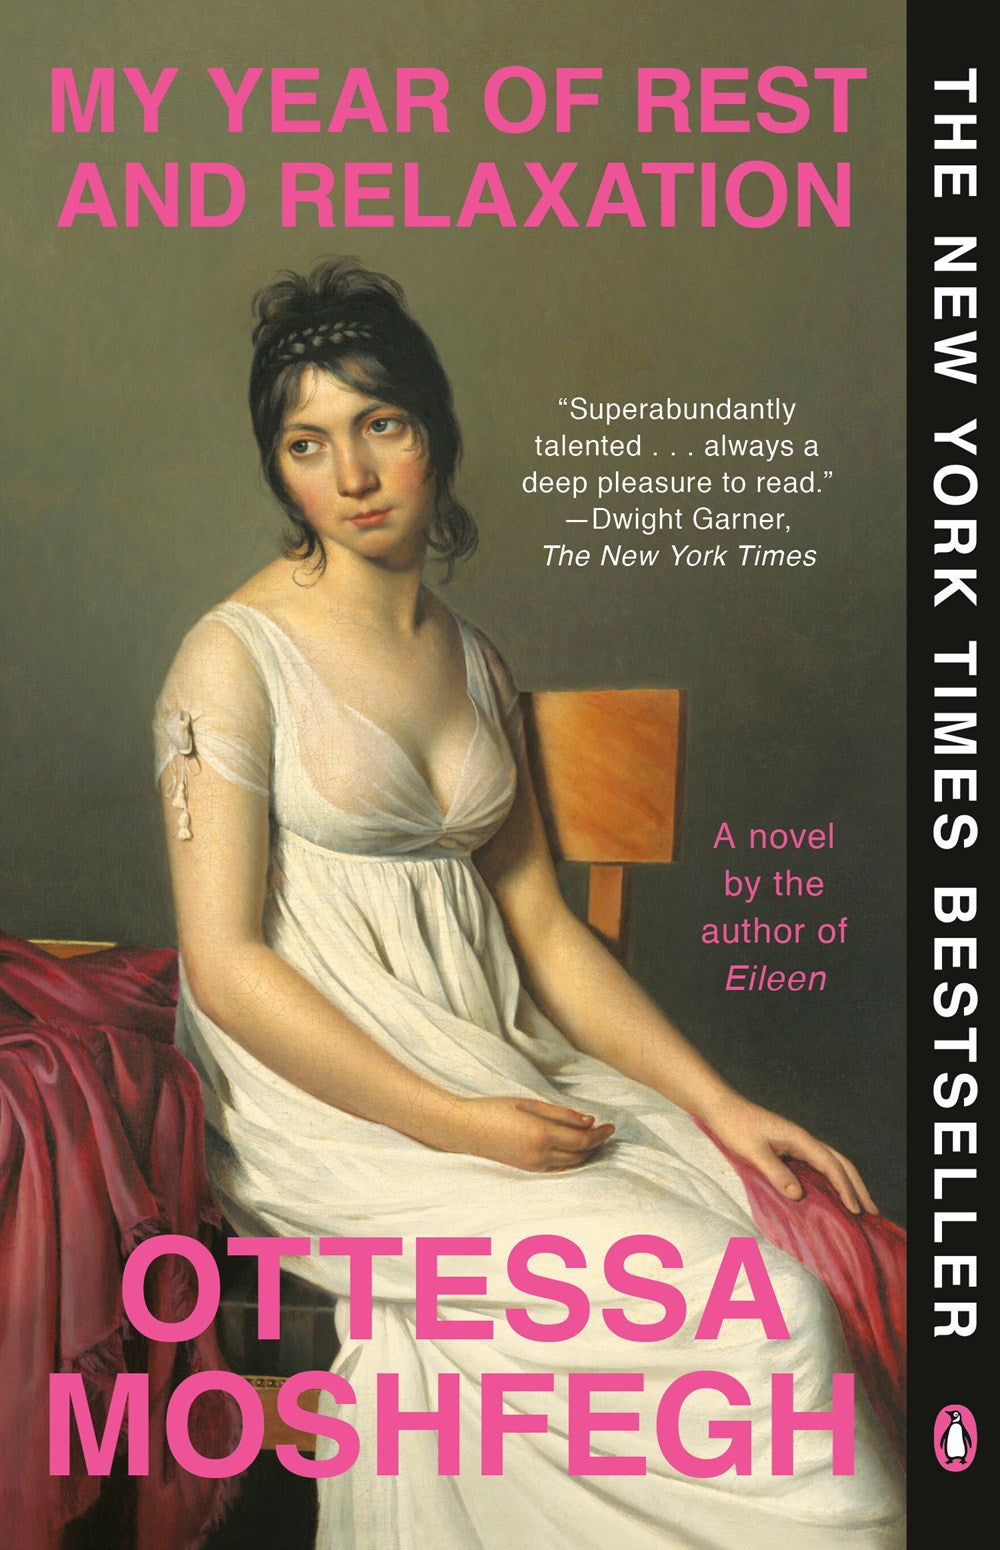 My Year of Rest and Relaxation: A Novel by Ottessa Moshfegh